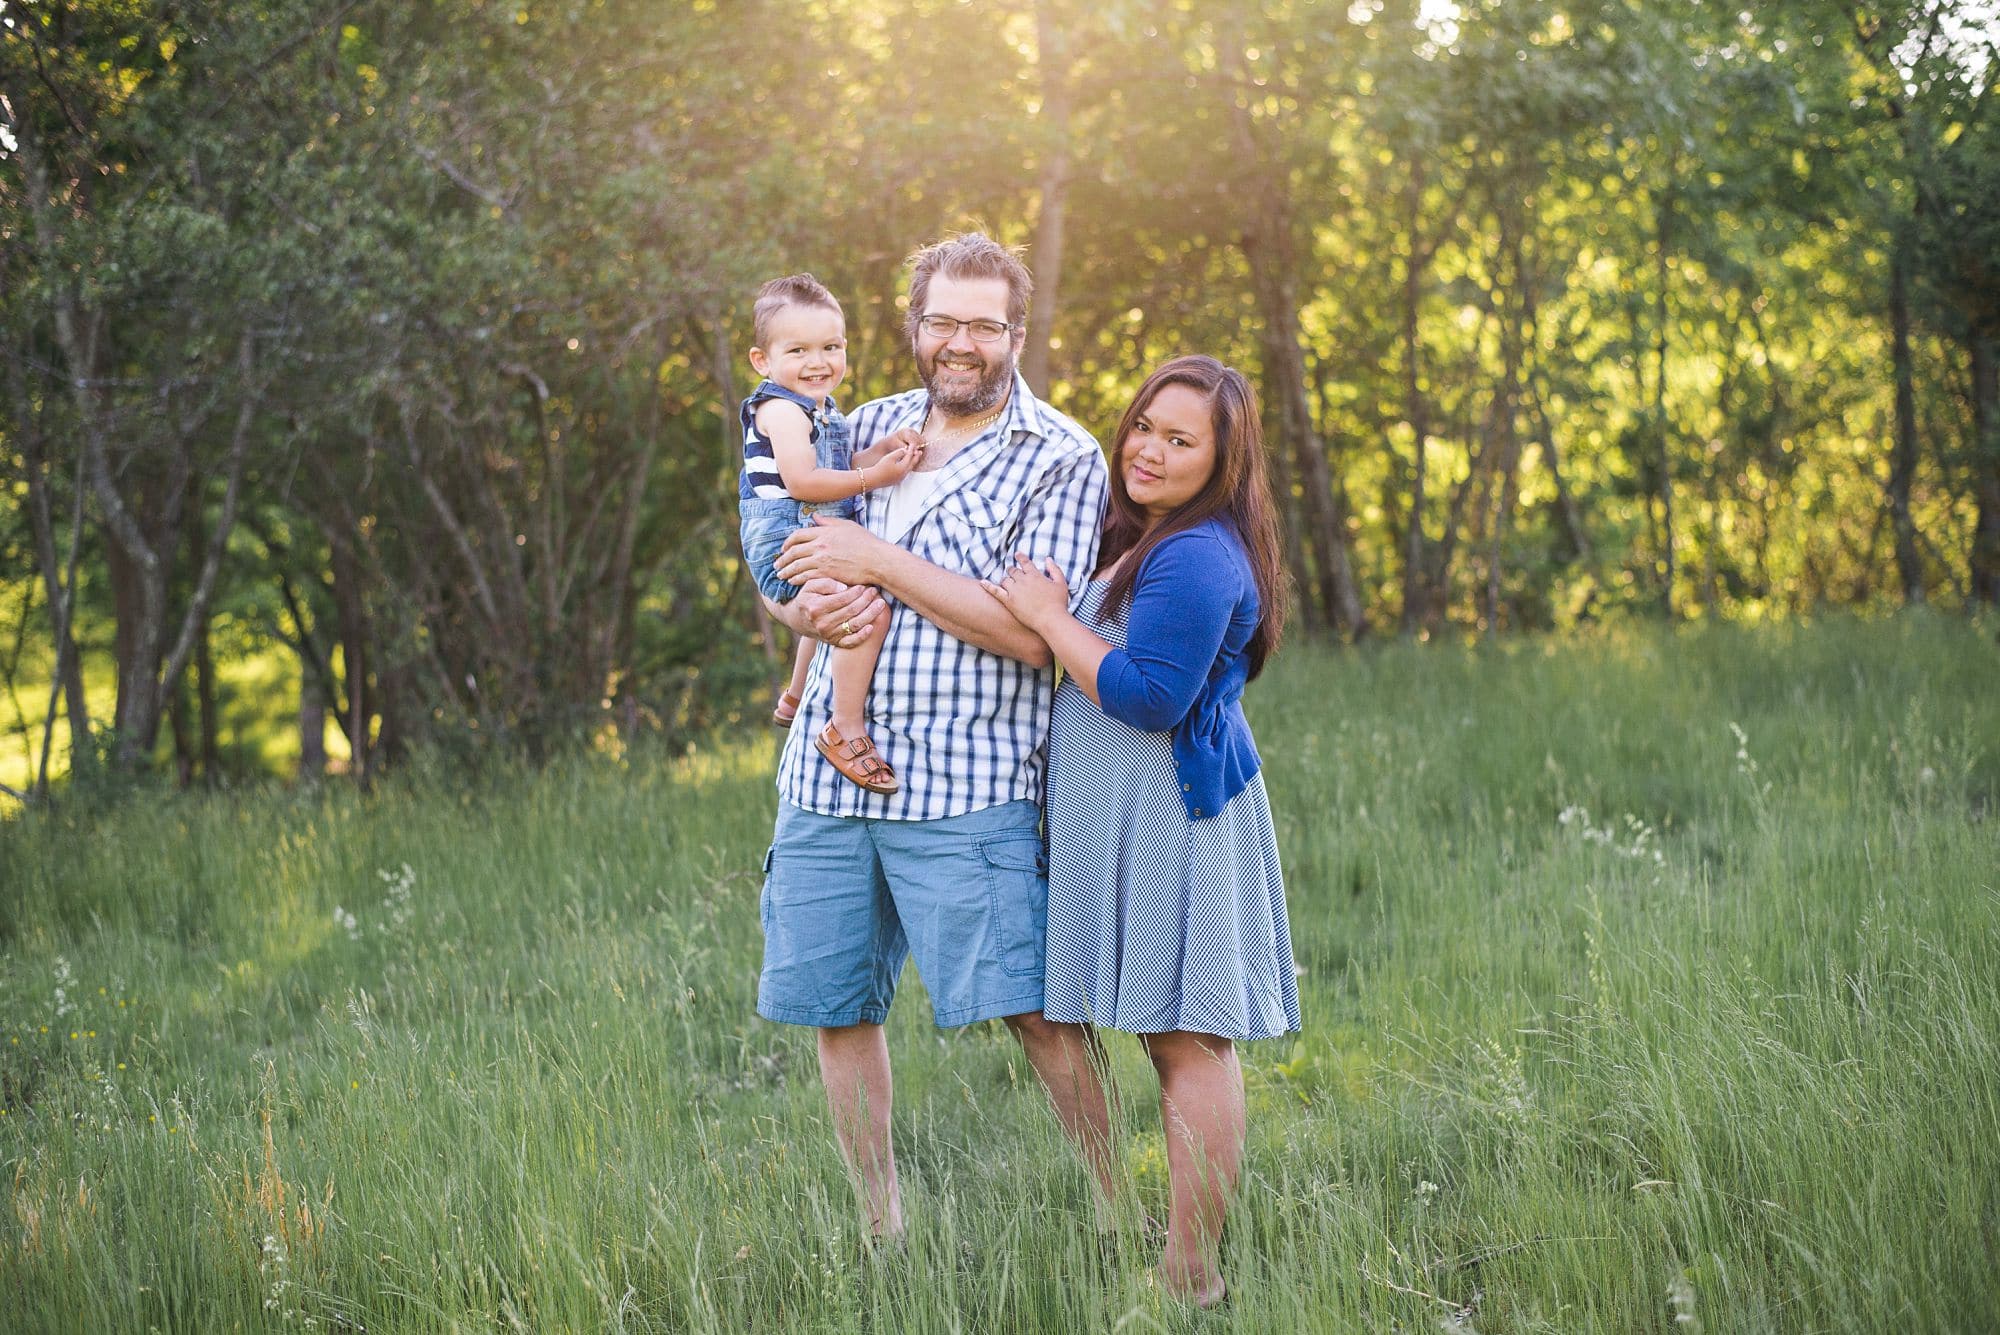 Family portrait session outdoors with golden sunlight behind them